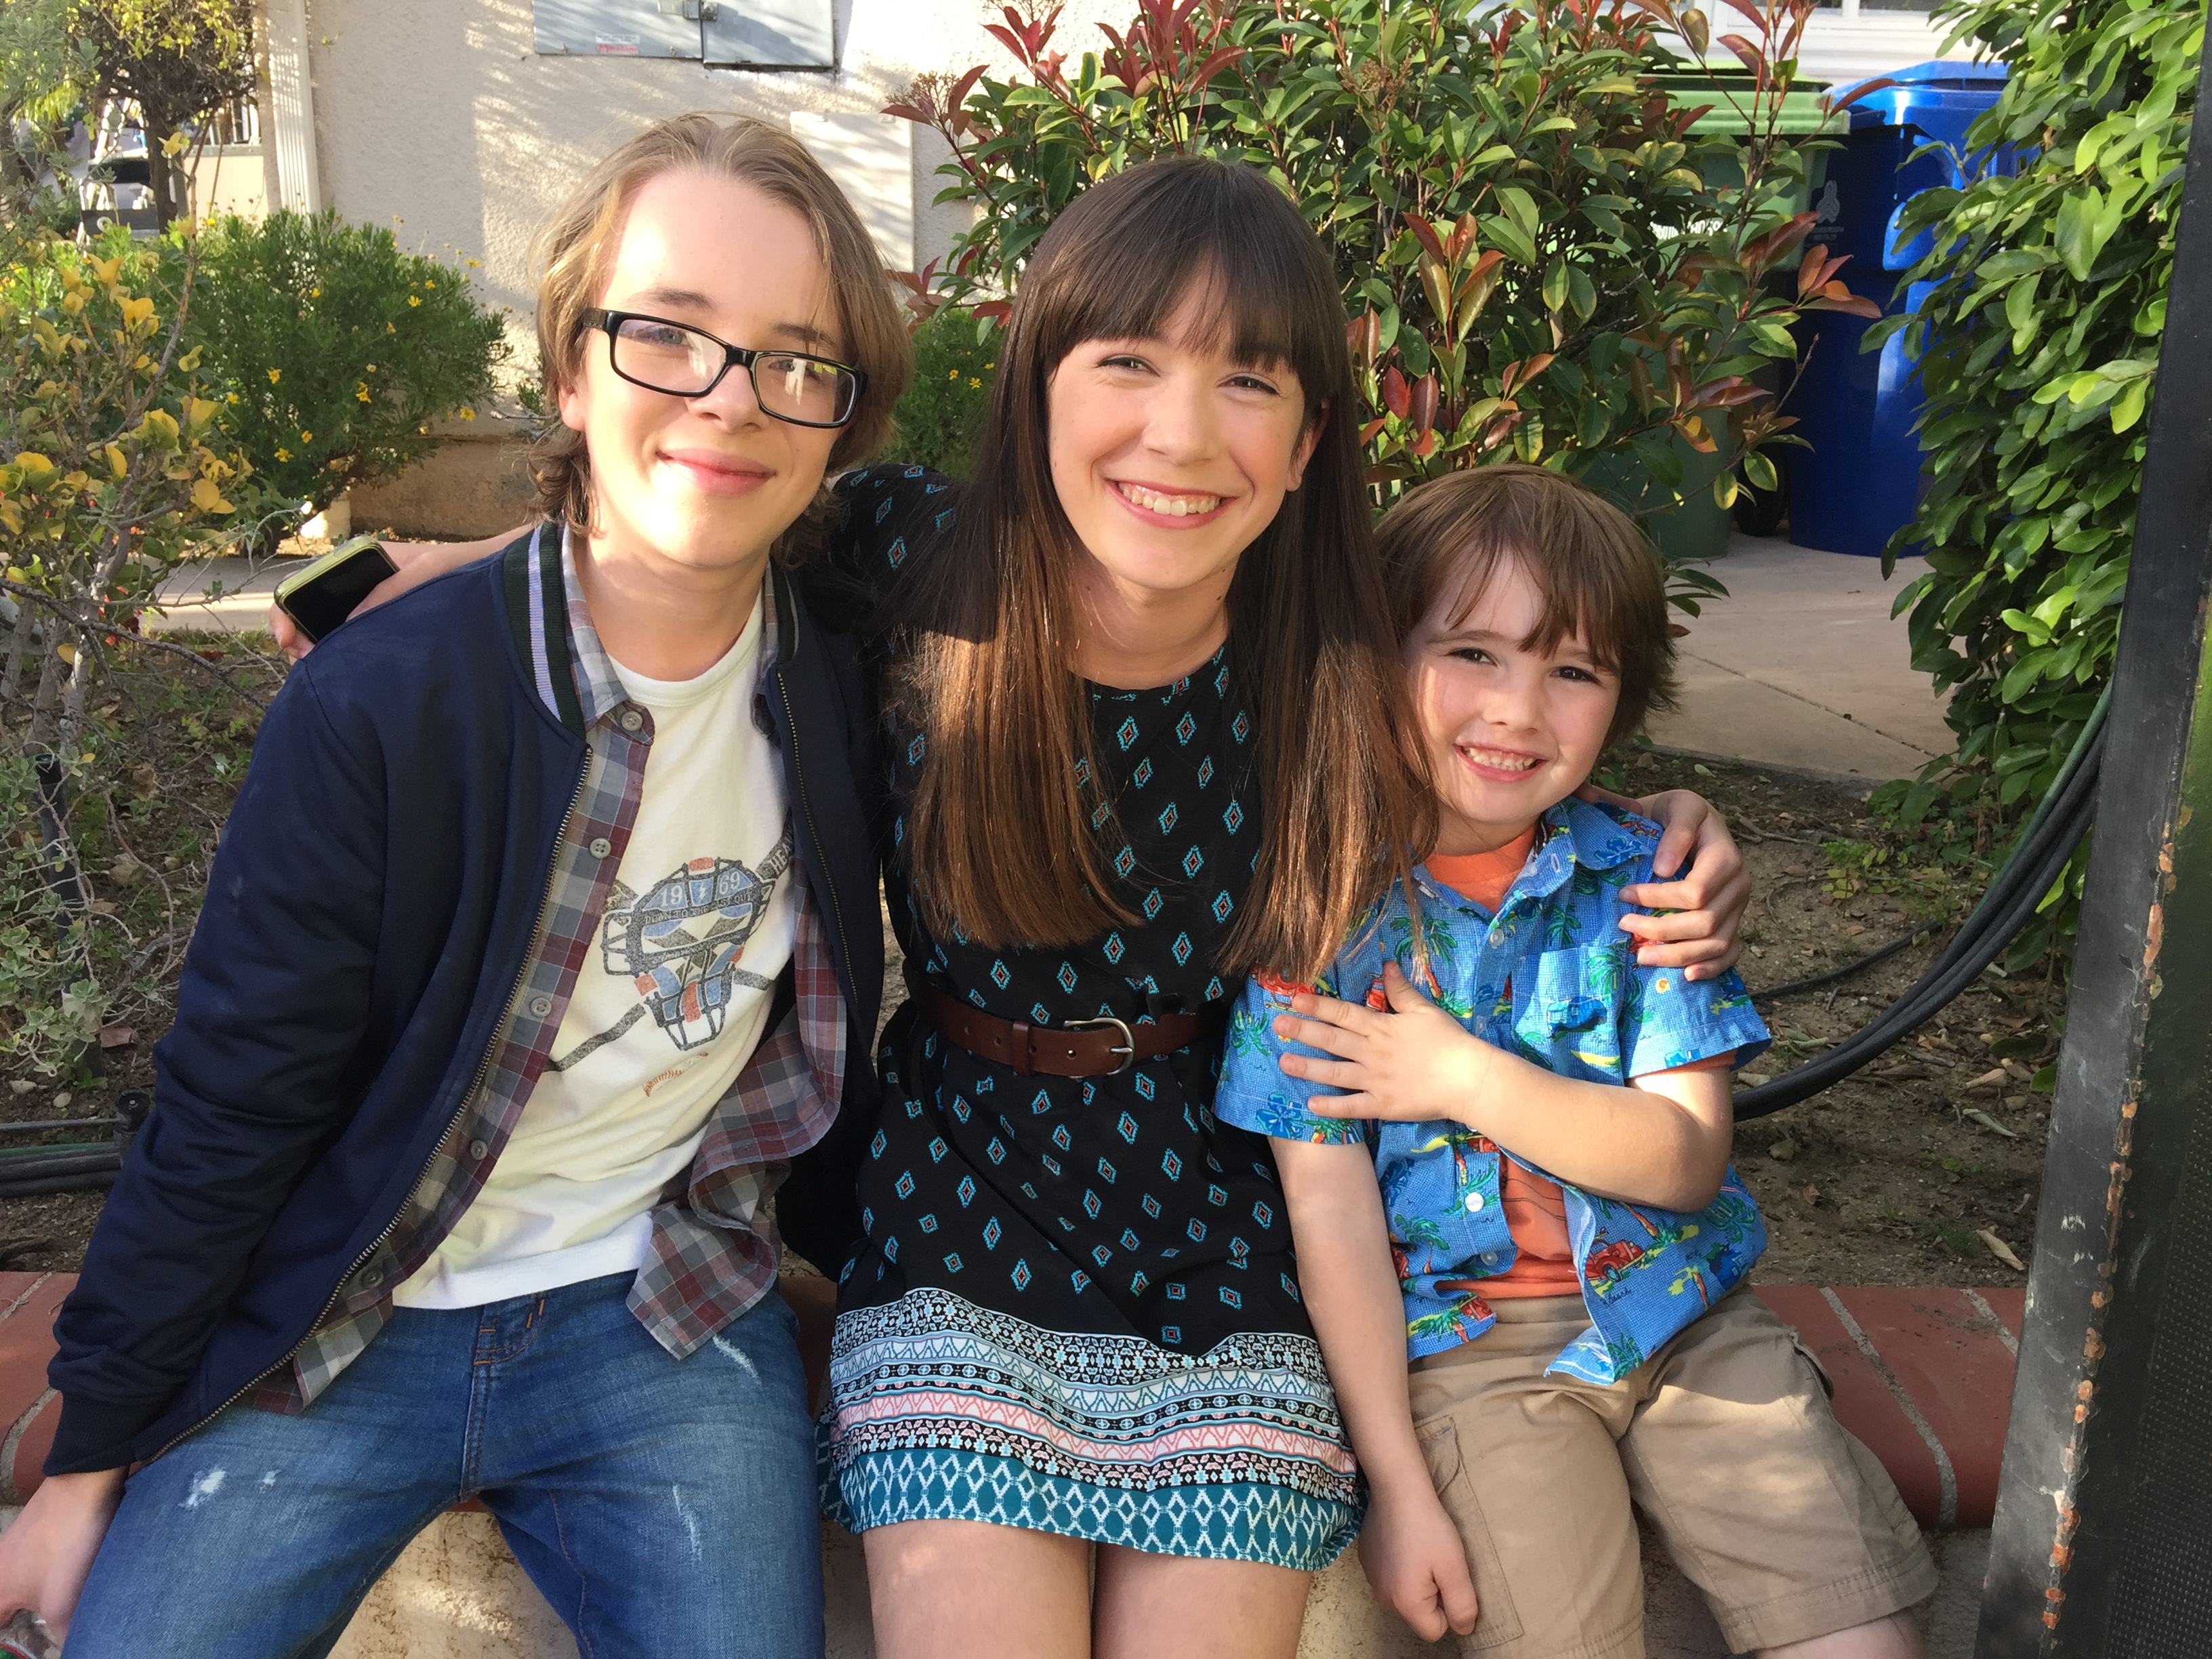 Ed Oxenbould, Grace Kaufman and Cooper J. Friedman on the set of Chevy (2015)